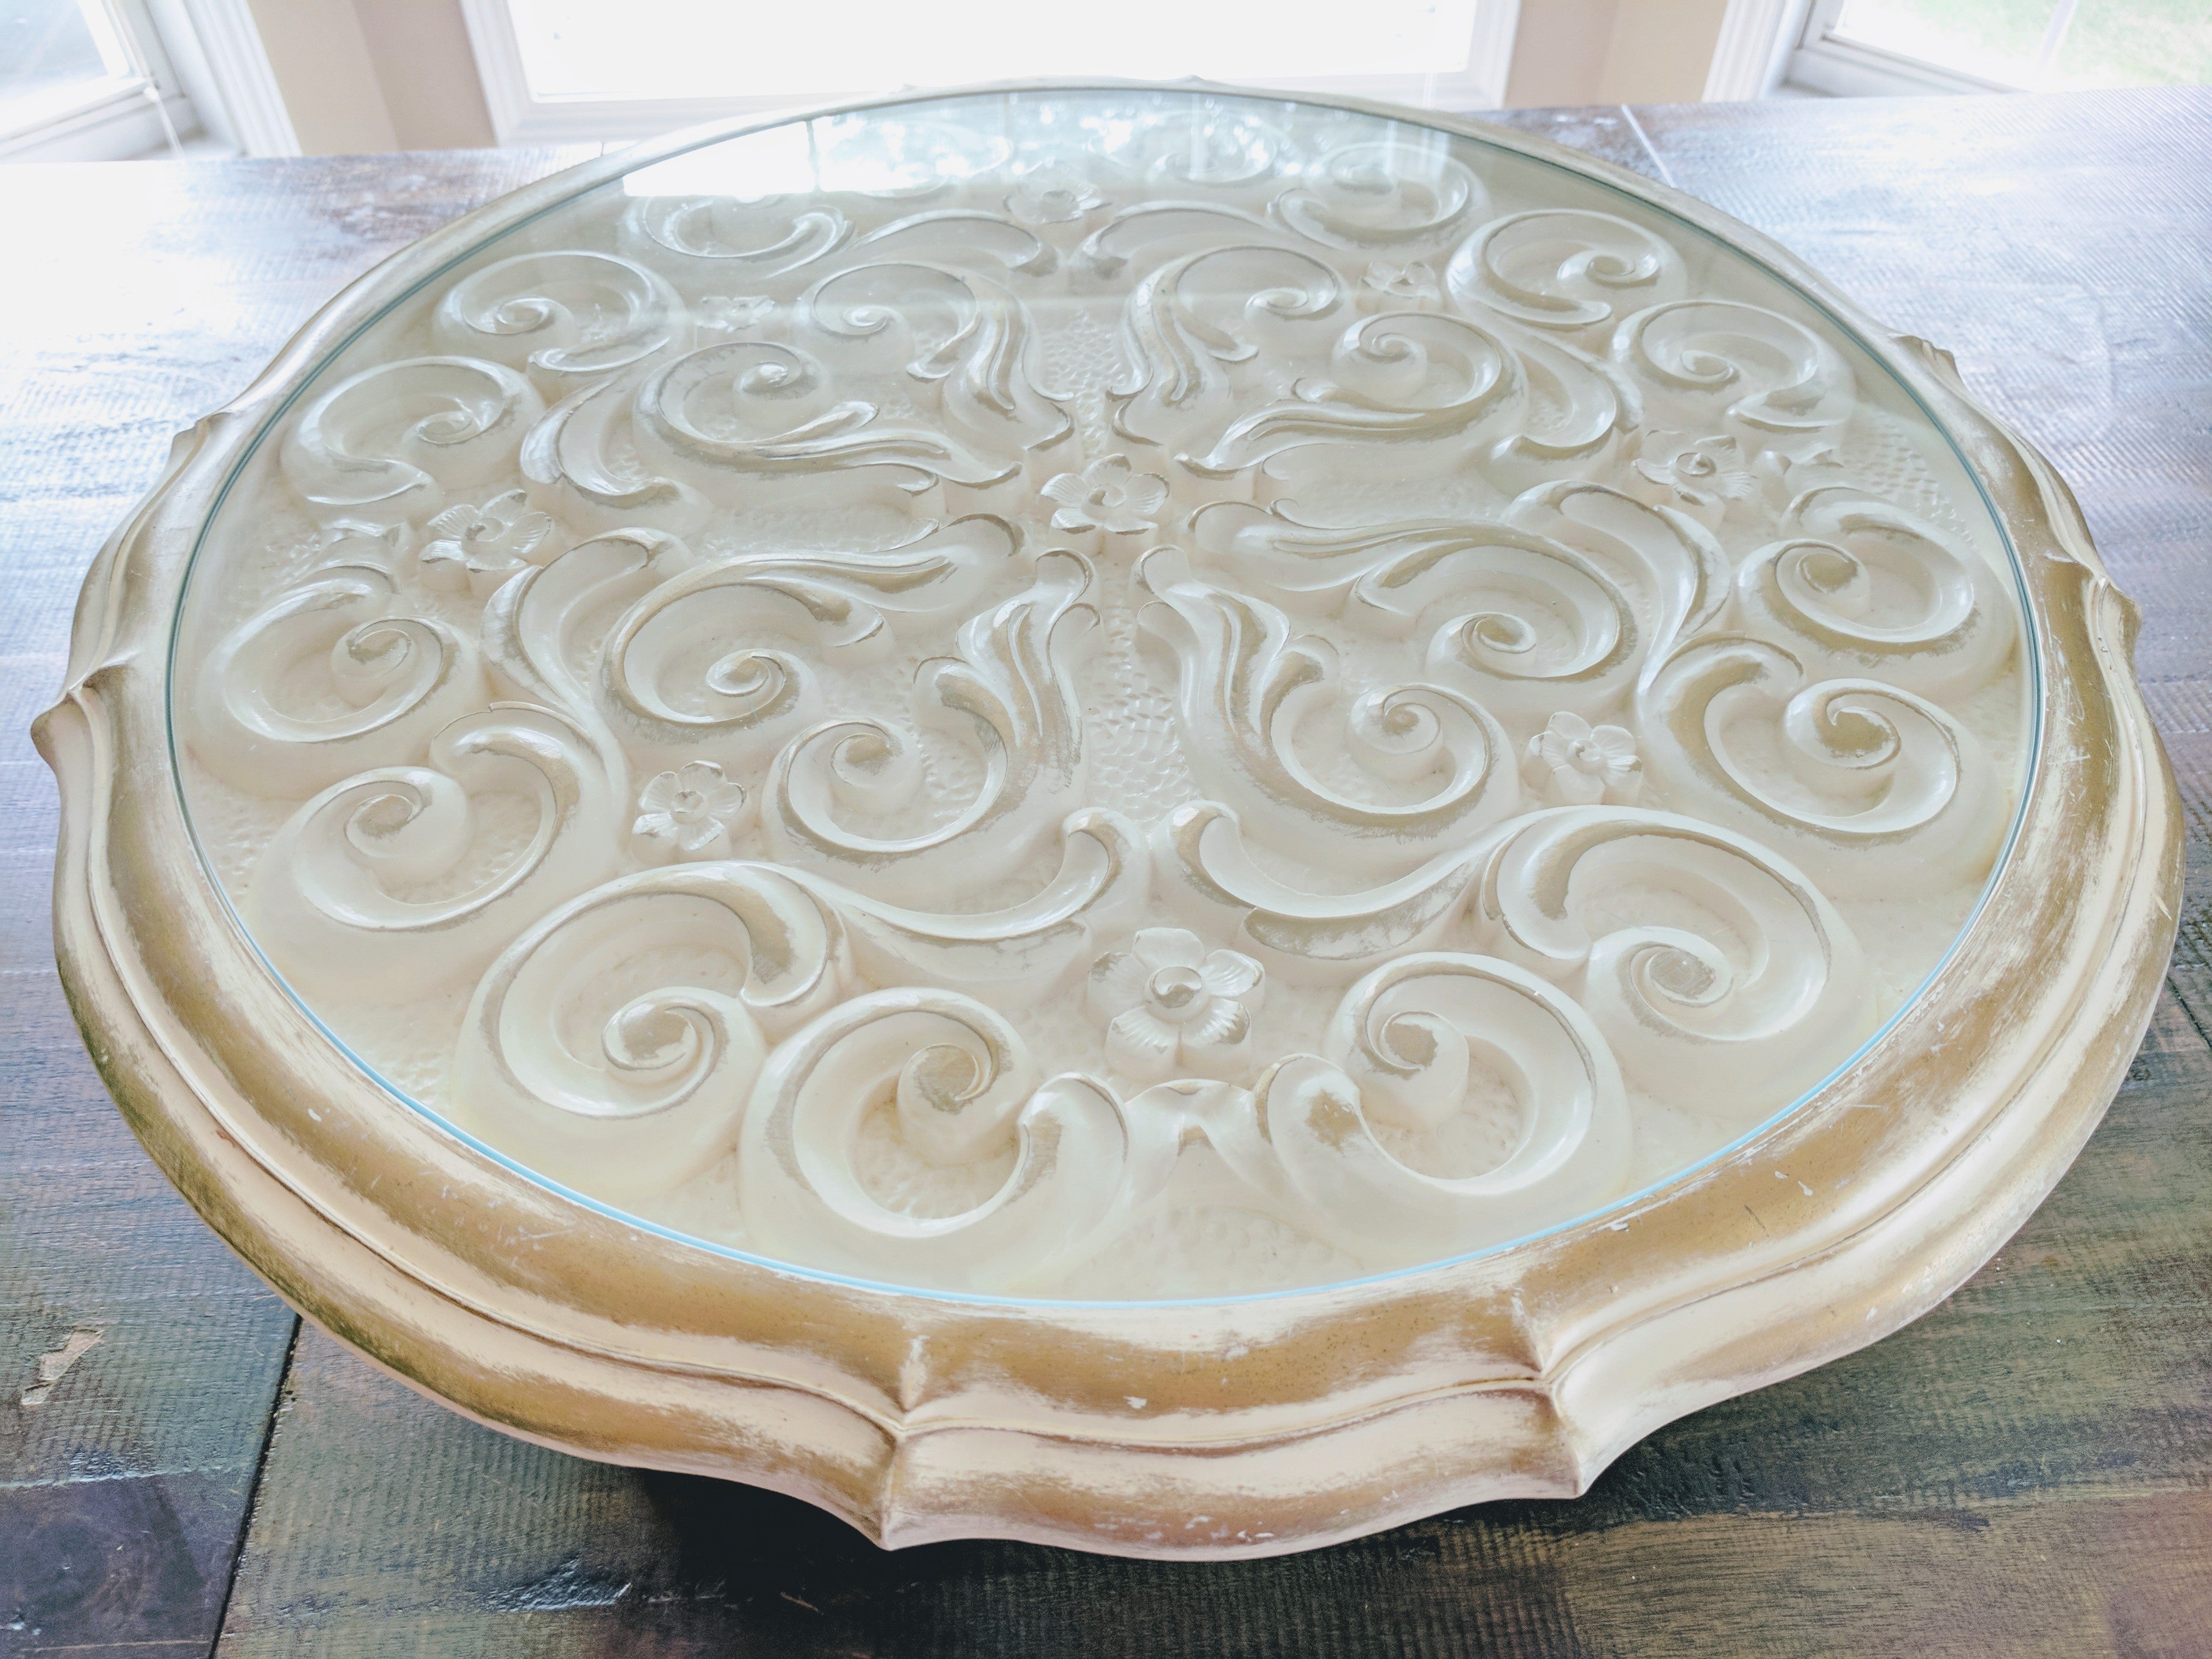 18" Ornate Glass Top Cake Stand- RENTAL - The Wedding Shop